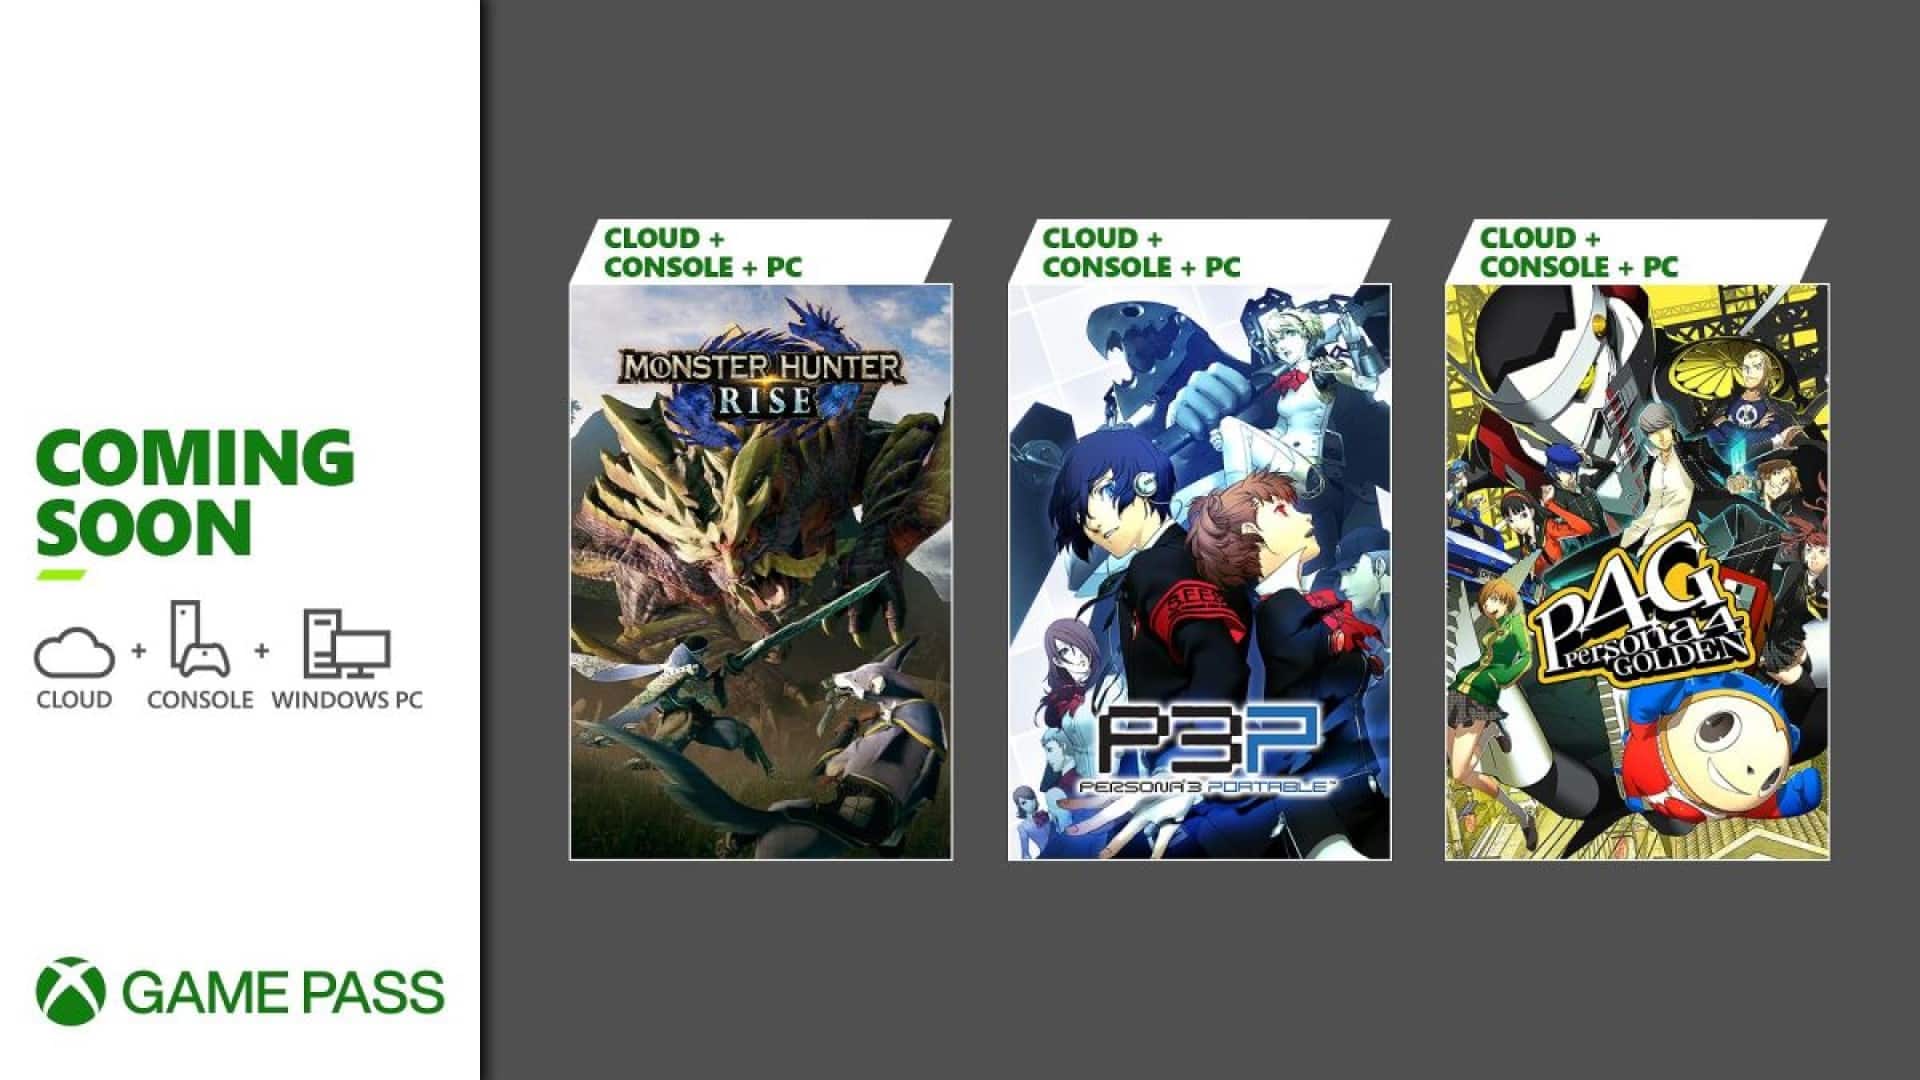 Monster Hunter Rise, Persona 3 Portable y Persona 4 Golden llegarán a Game Pass